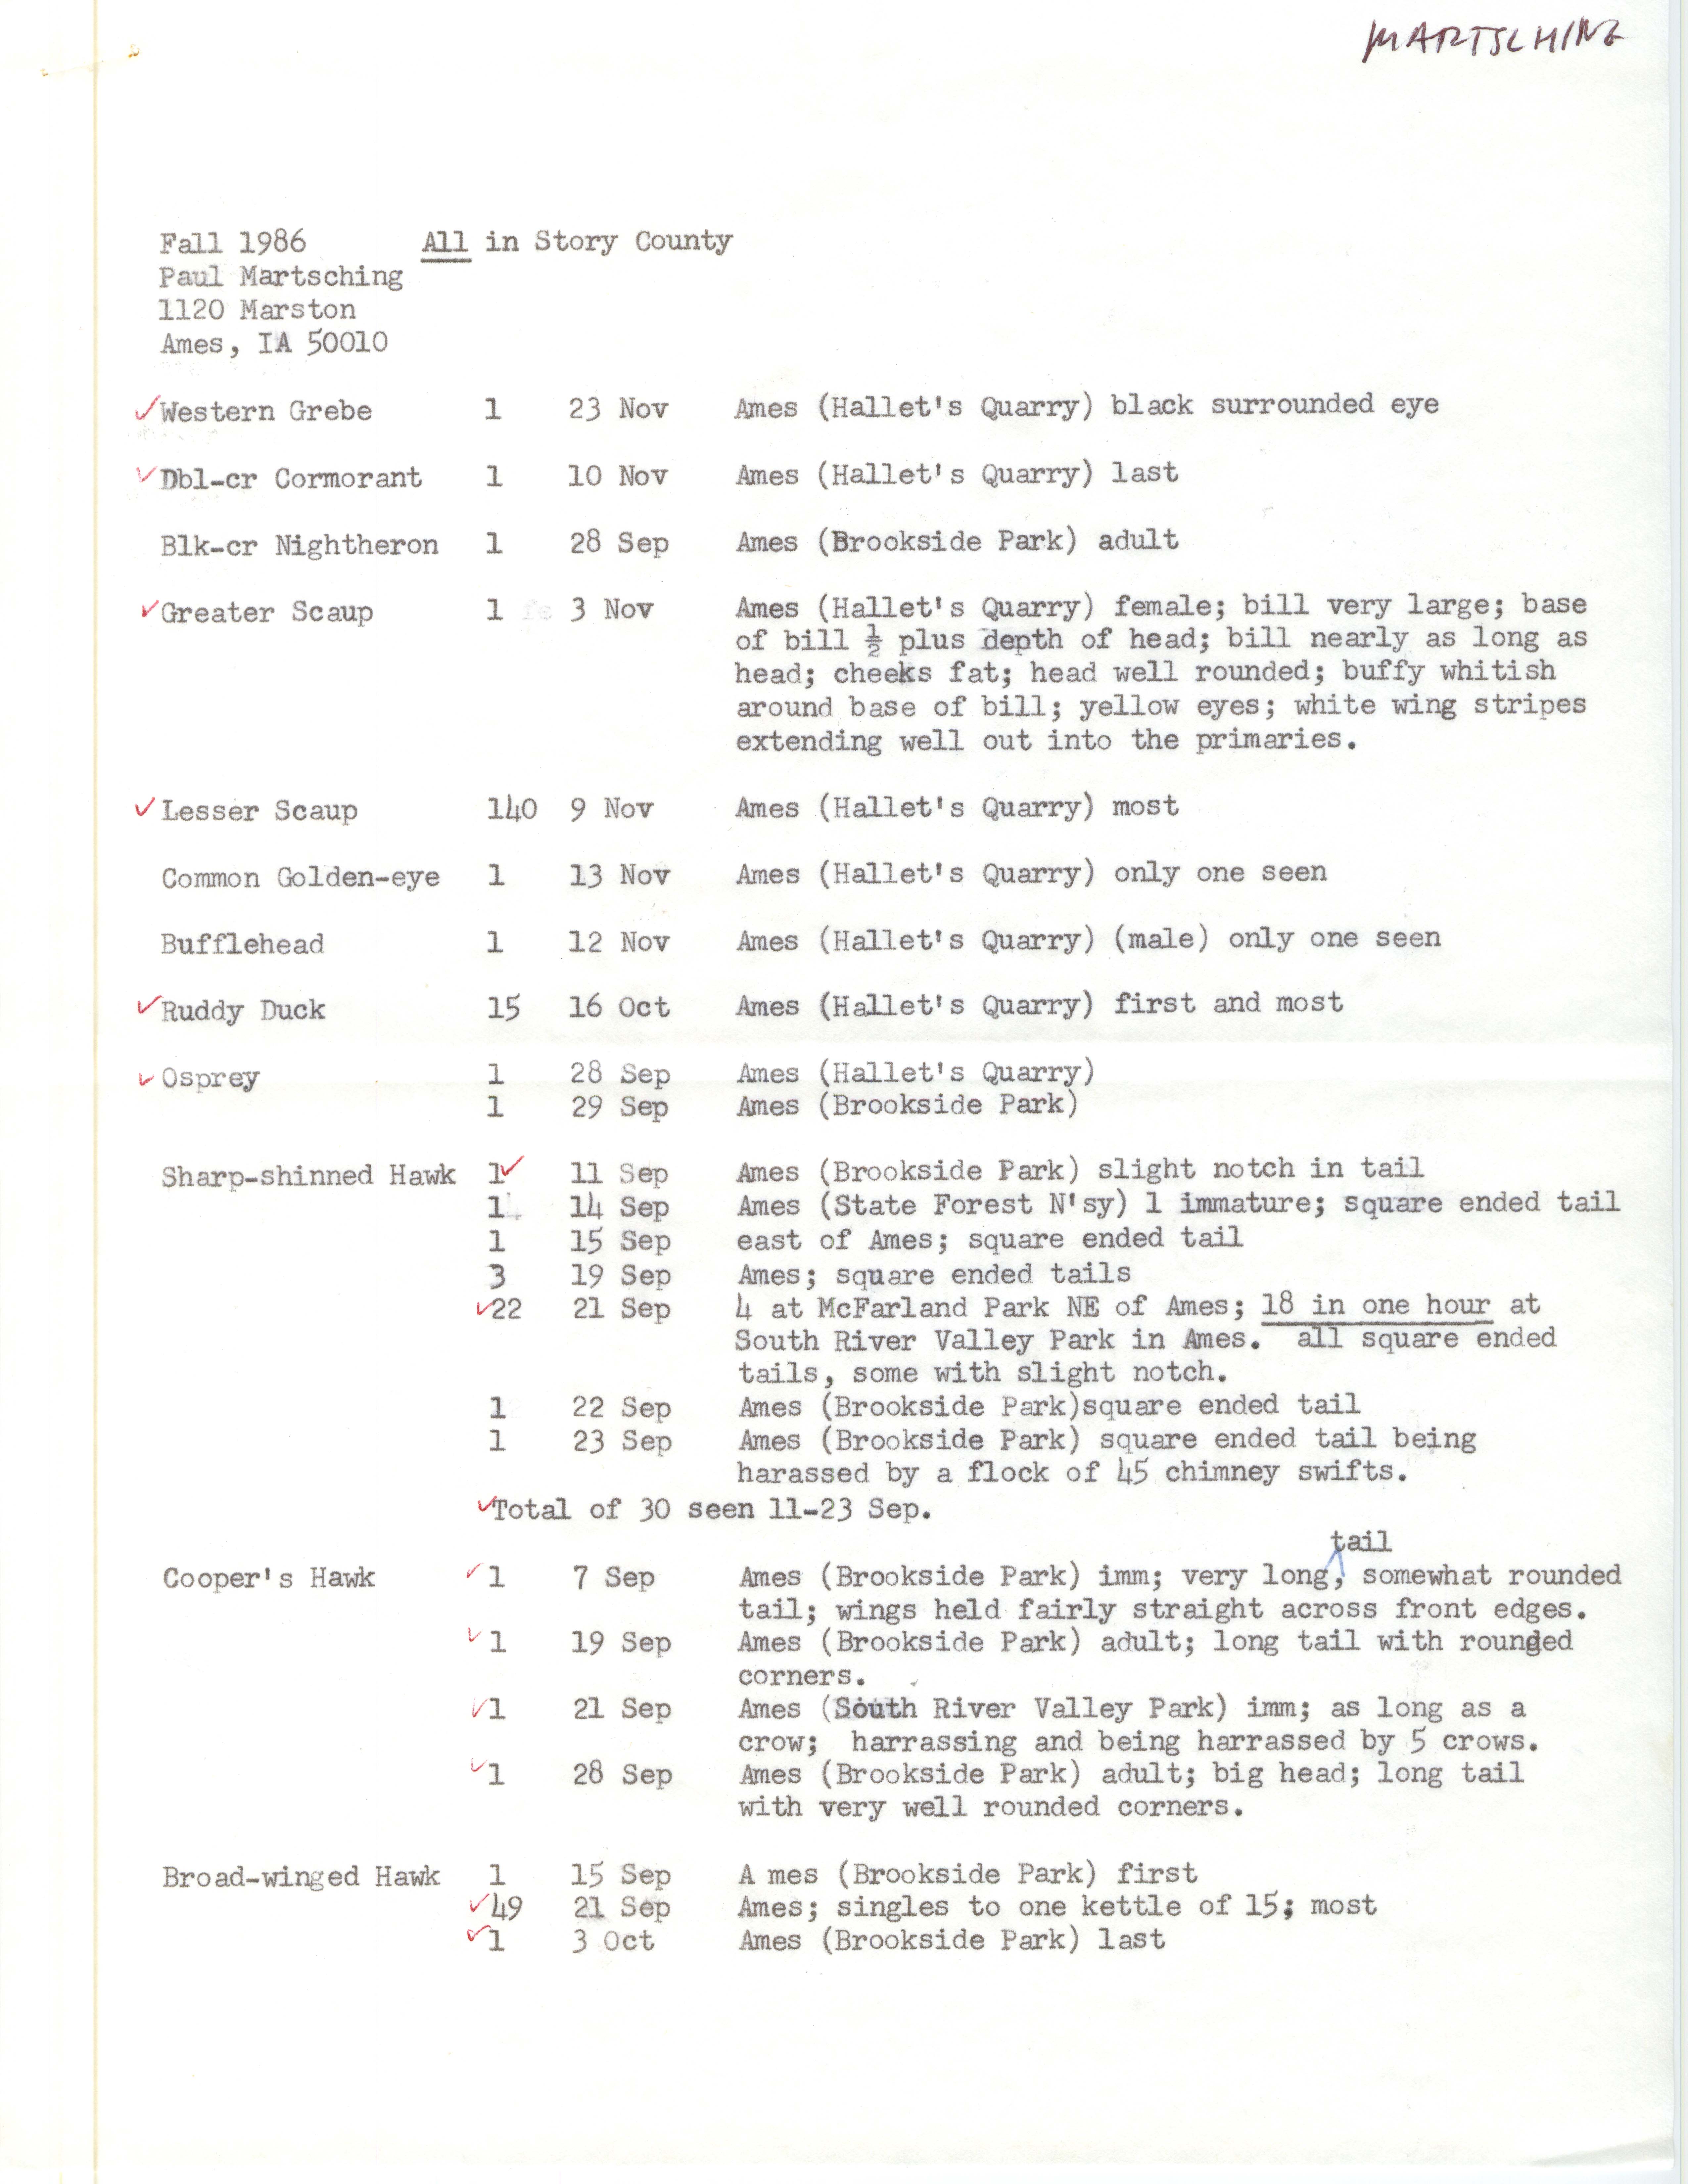 Field notes contributed by Paul Martsching, fall 1986